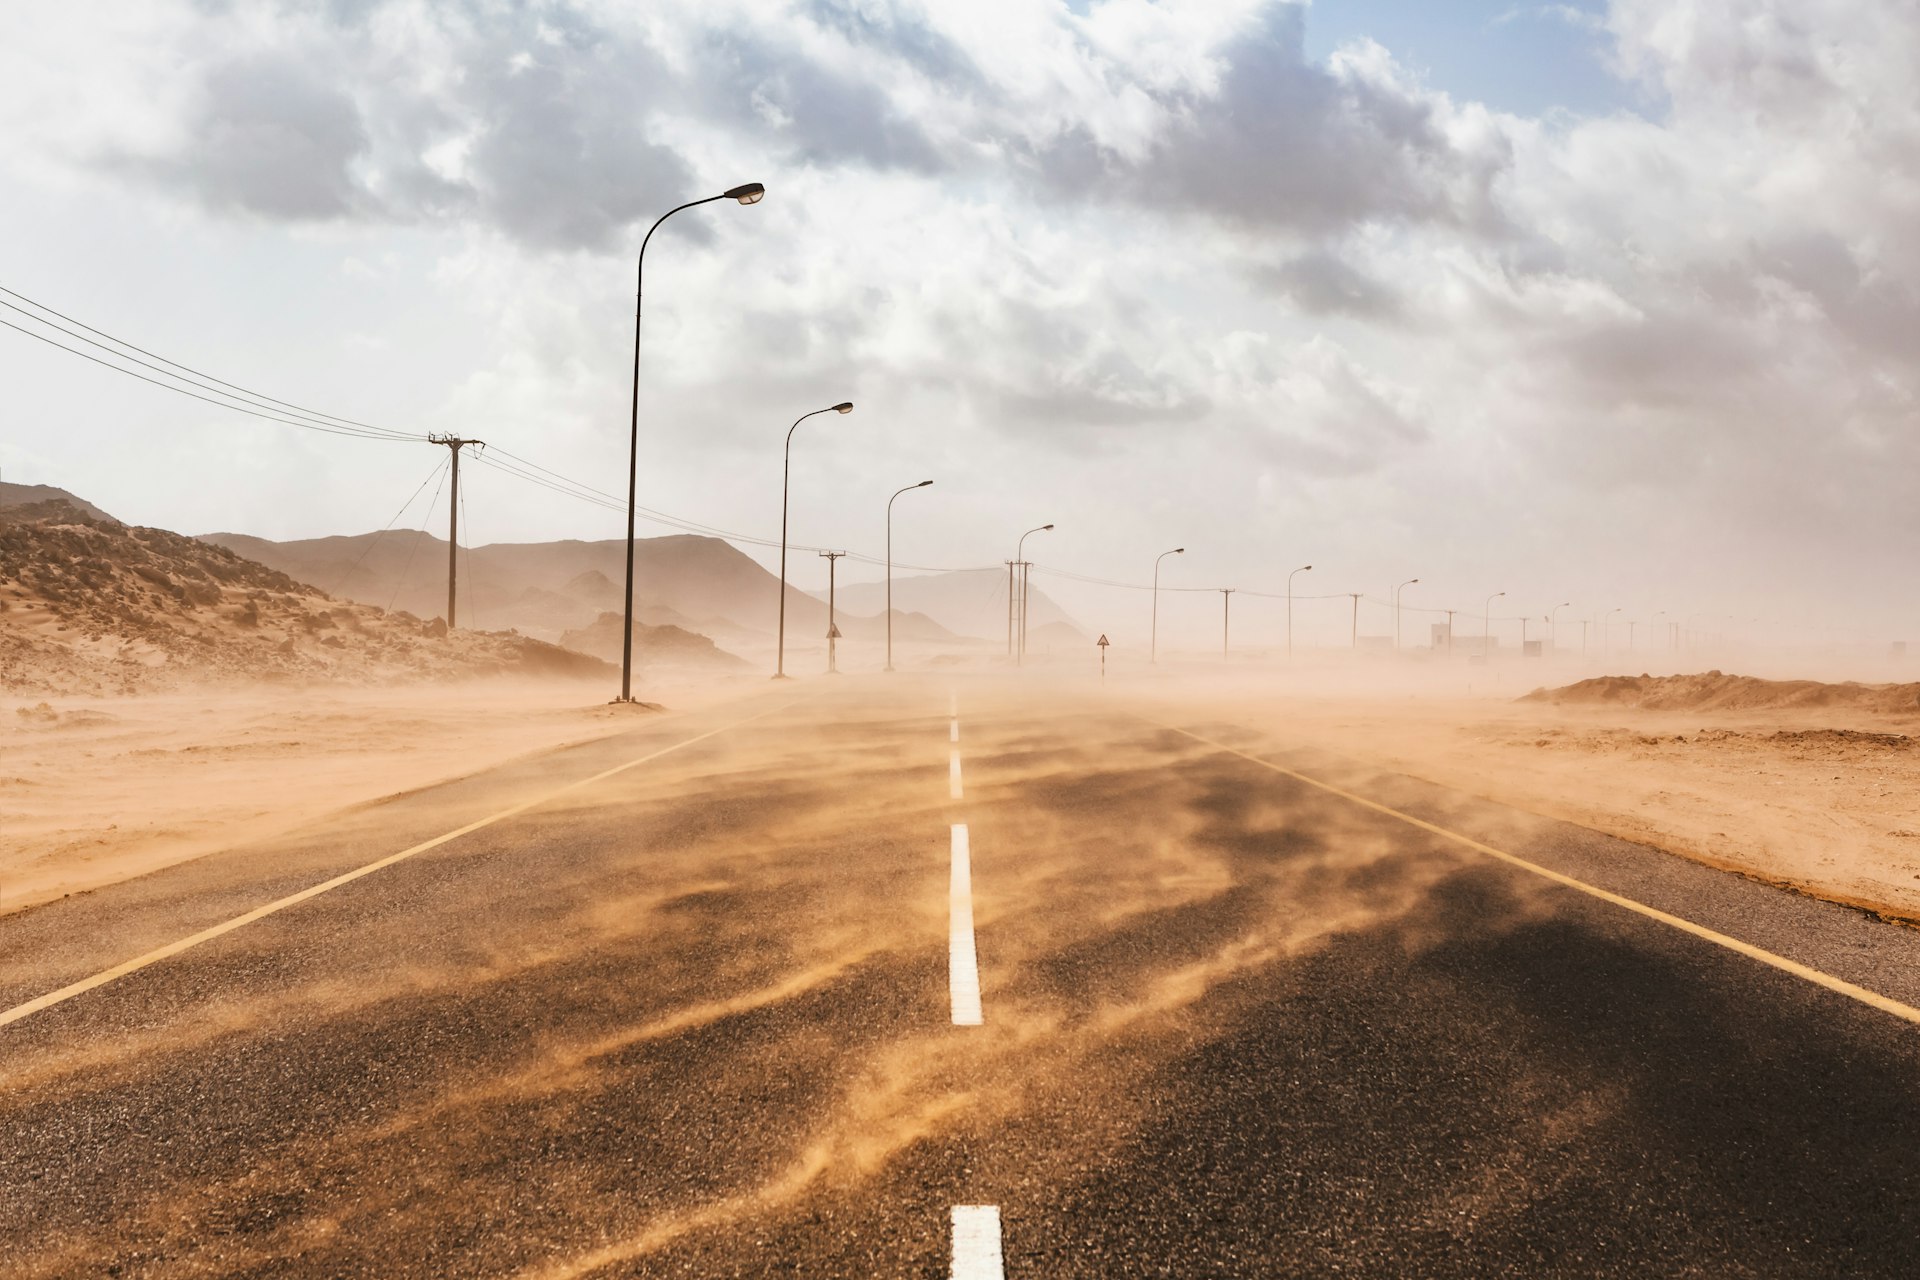 Sand blows across a road during a sandstorm in Ras al Hadd, Oman